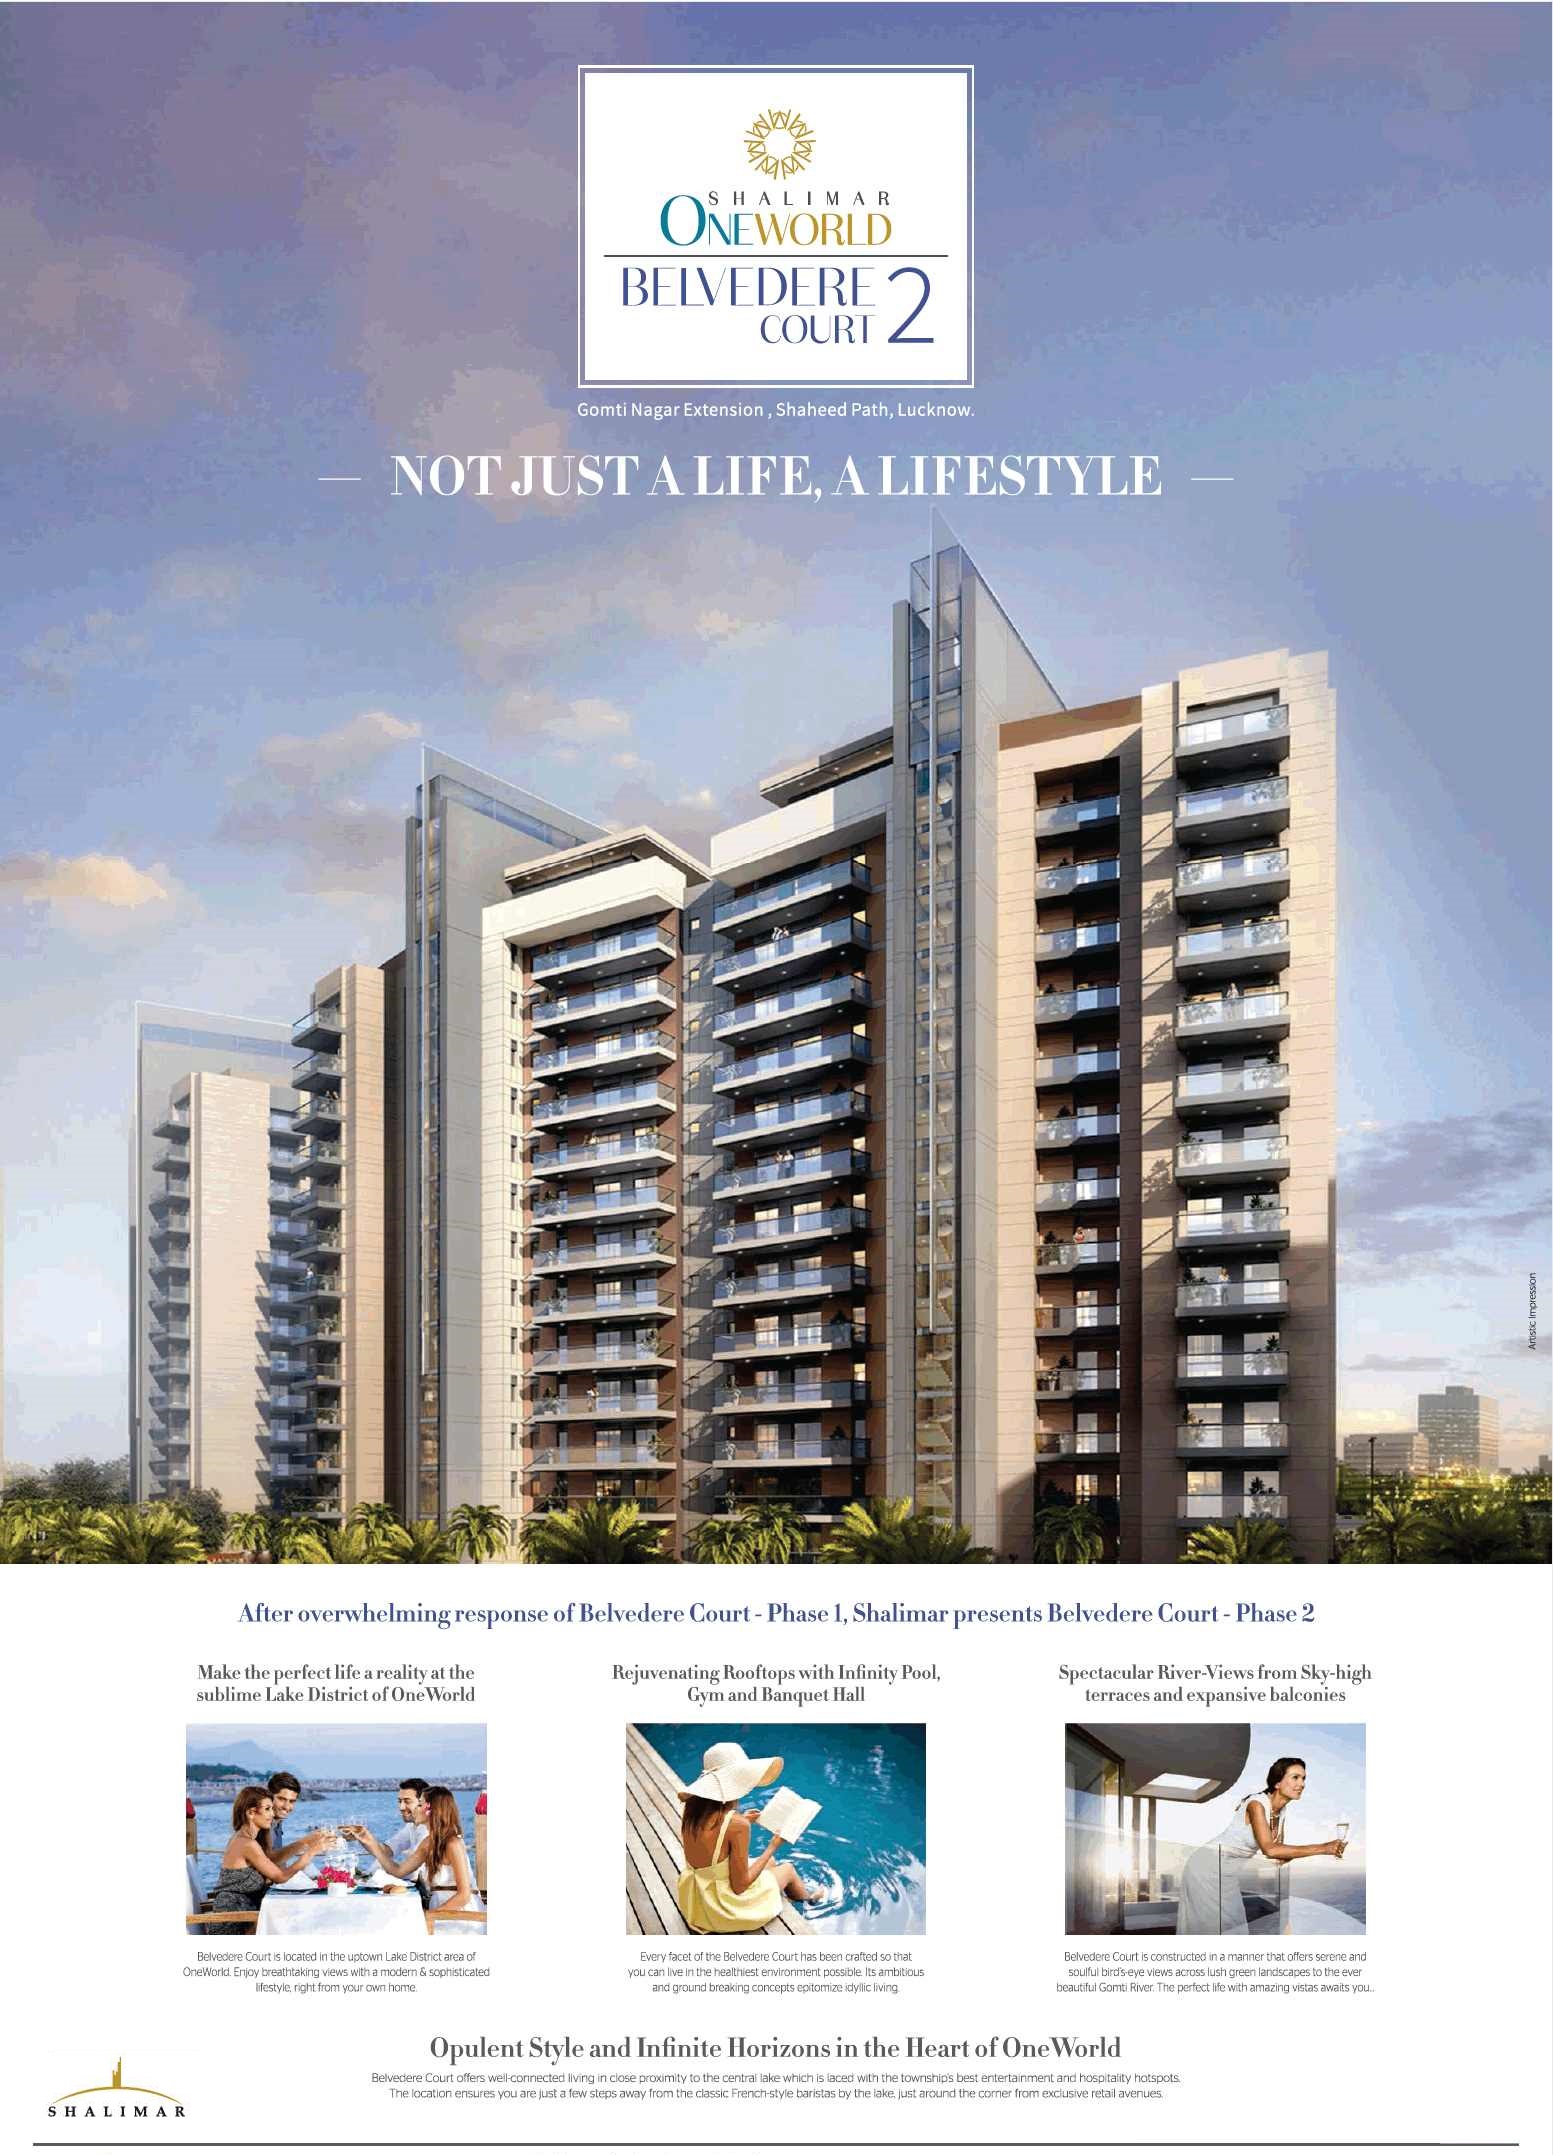 Shalimar Oneworld Belvedere Court launching rejuvenating rooftops with infinity pools in Lucknow